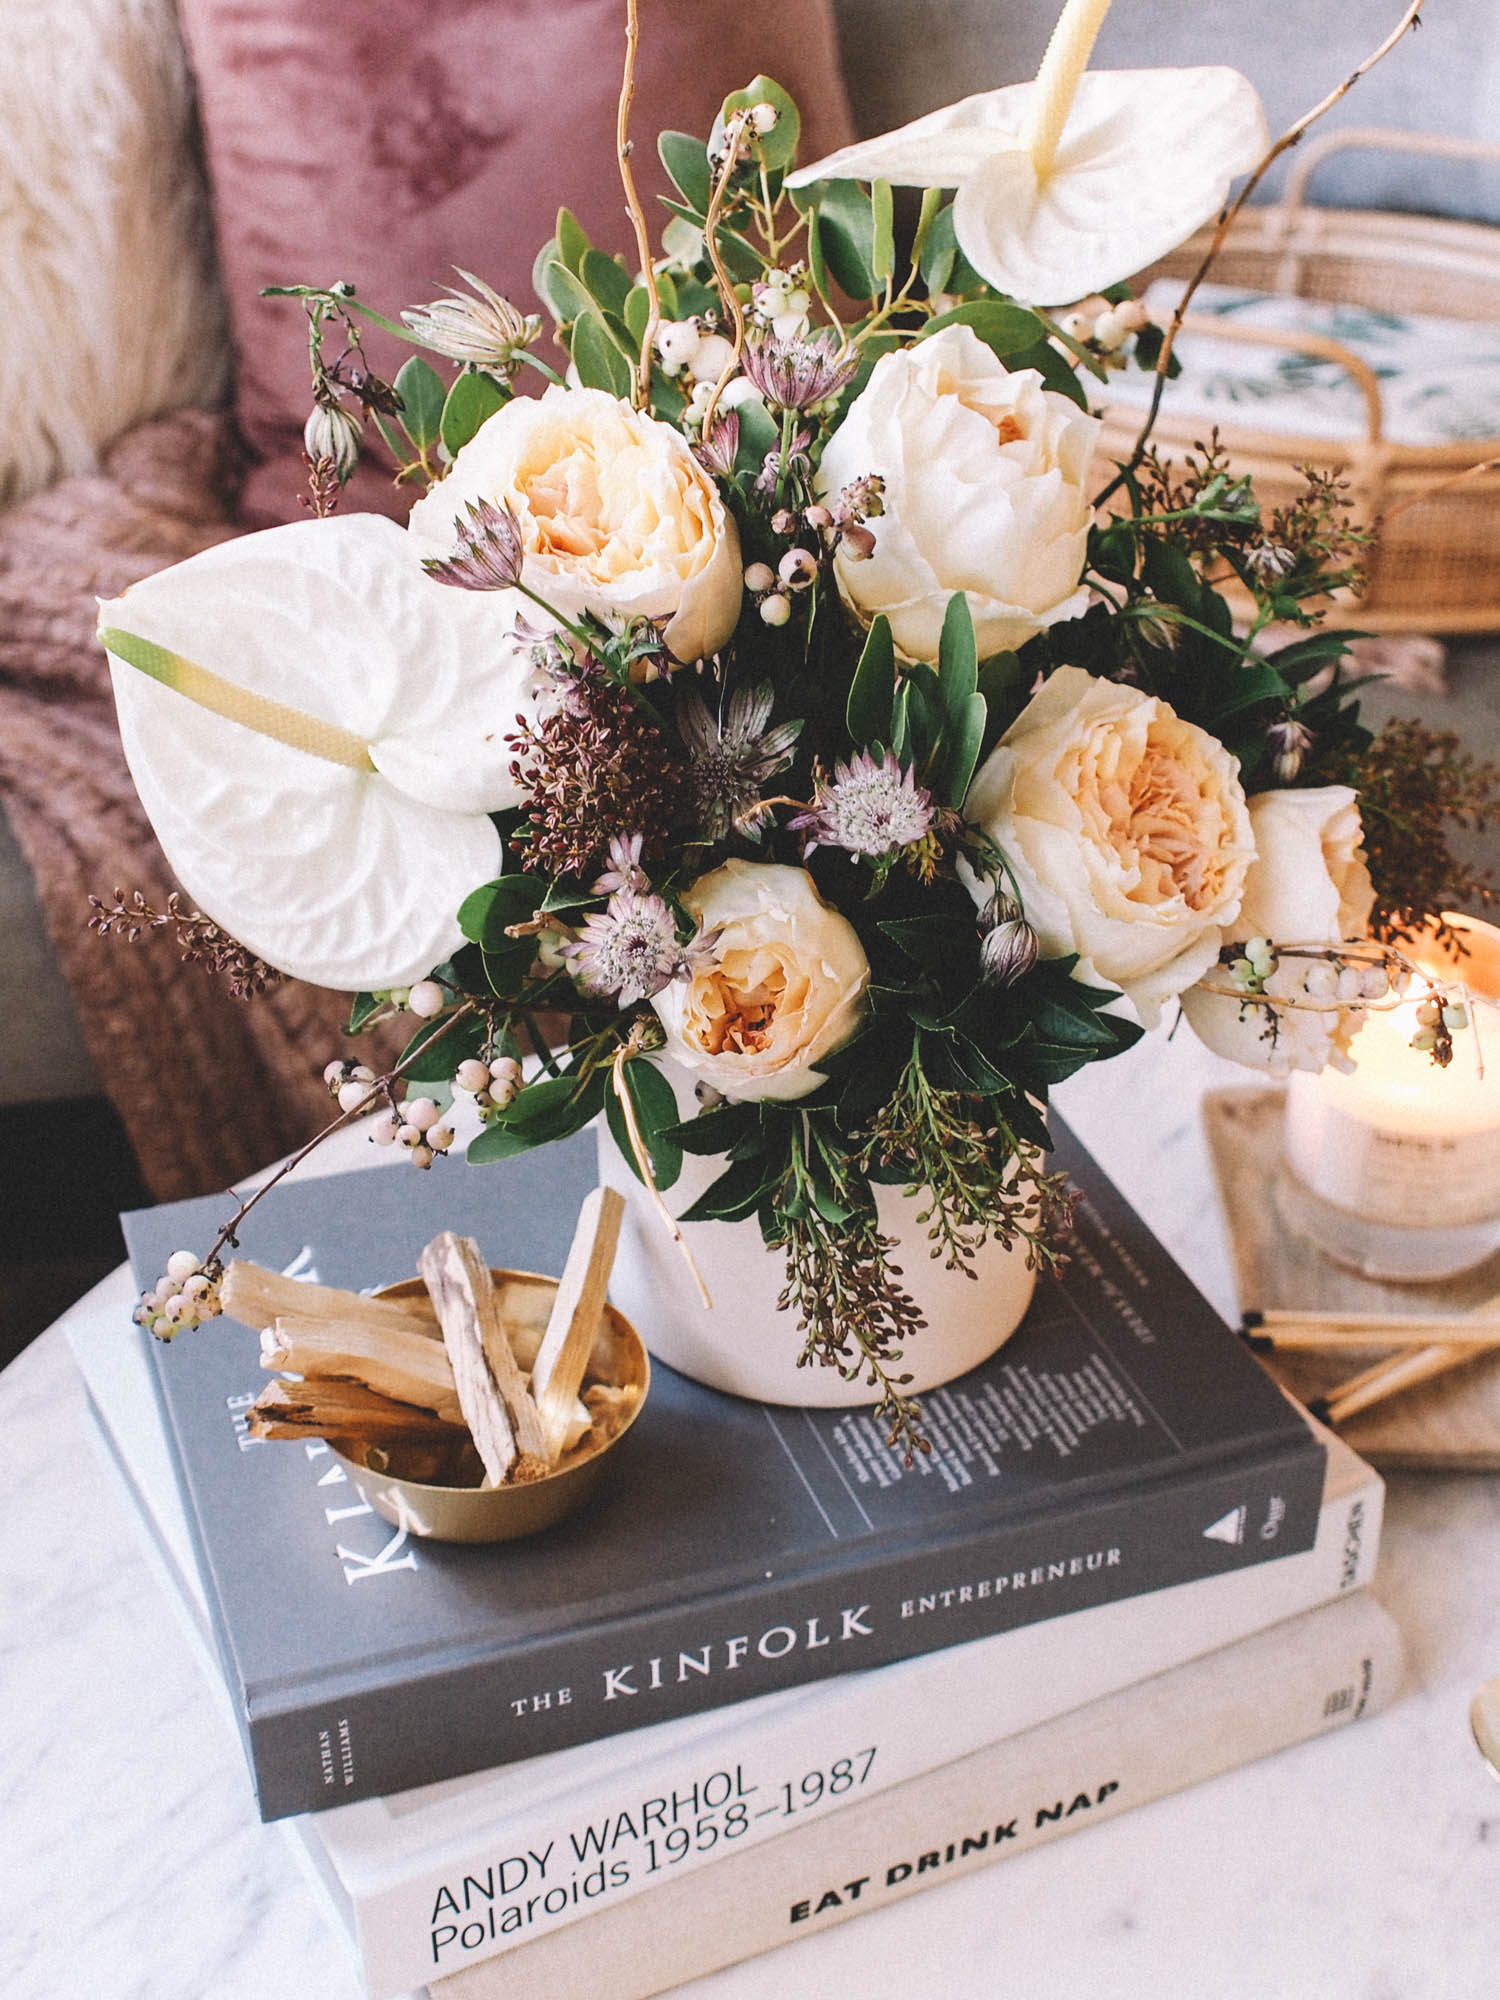 How To Style Your Coffee Table with Books — Lauren Saylor